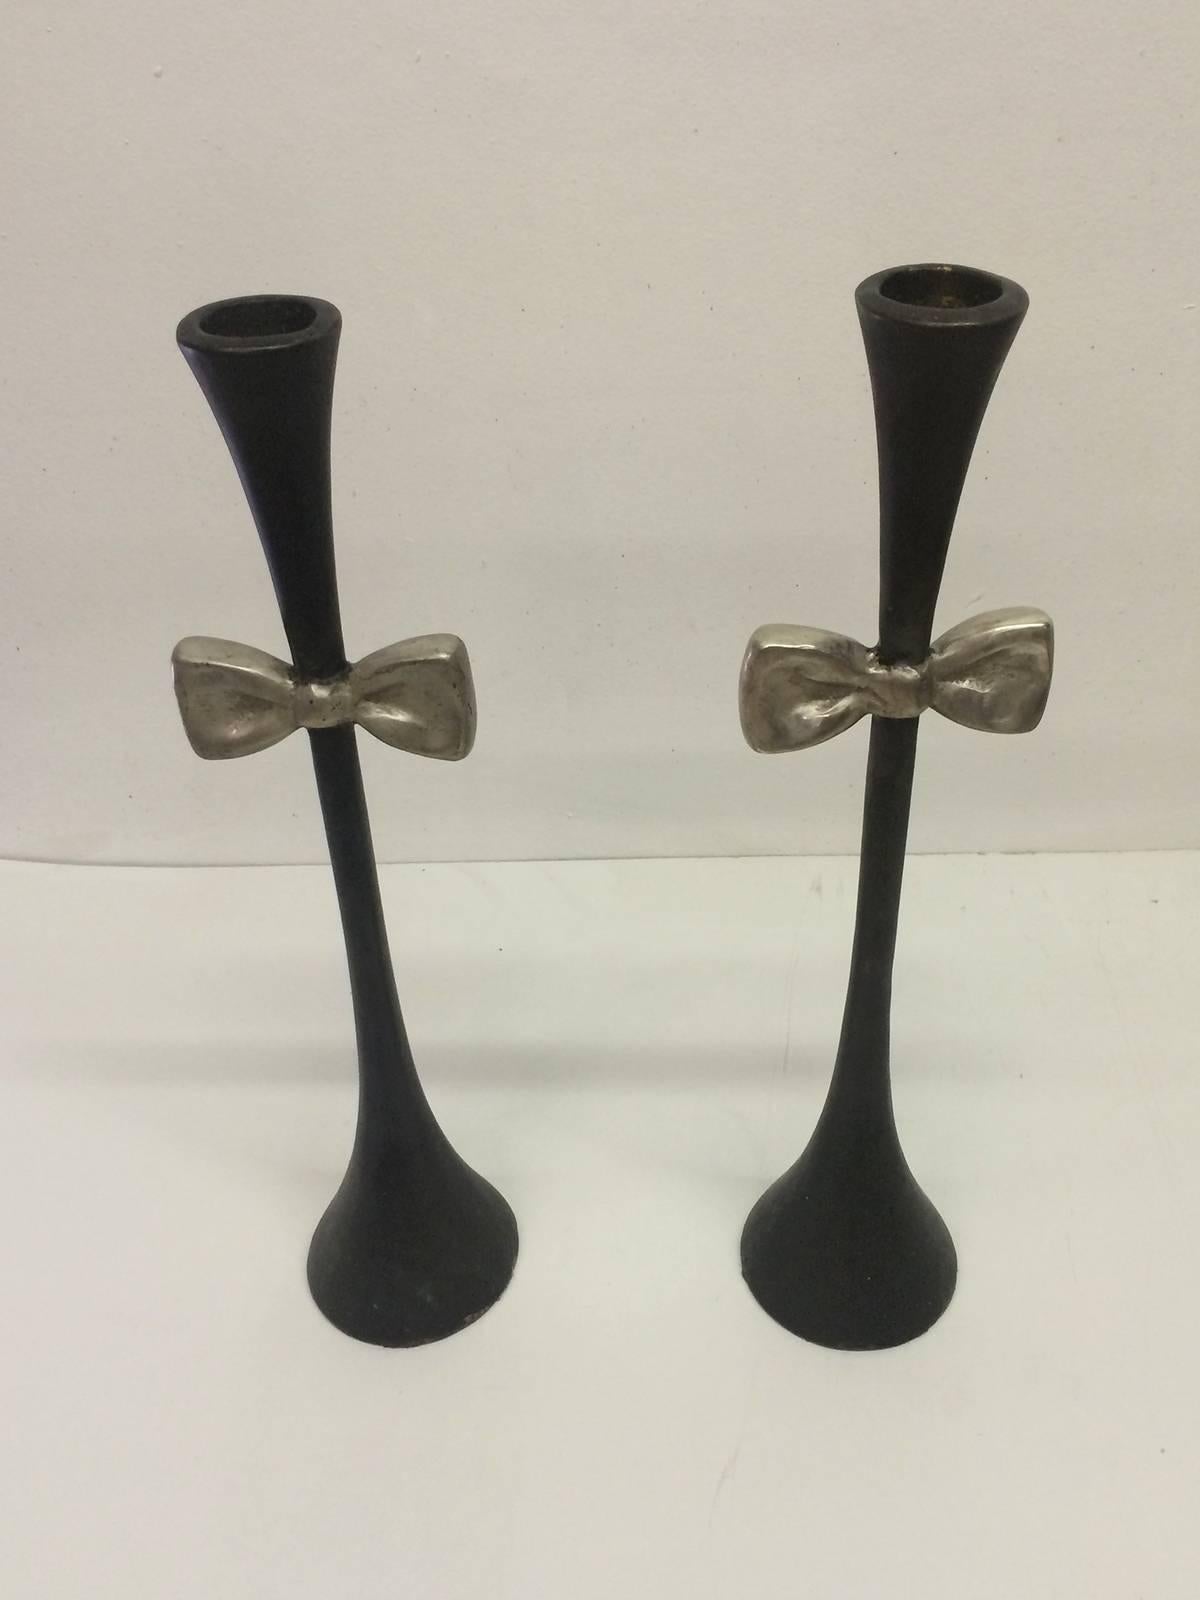 Pair of bronze candlesticks by Carl Gillberg. Conical ends and stem with a black finish and bow tie with a silver finish.
They are signed on the bottom.